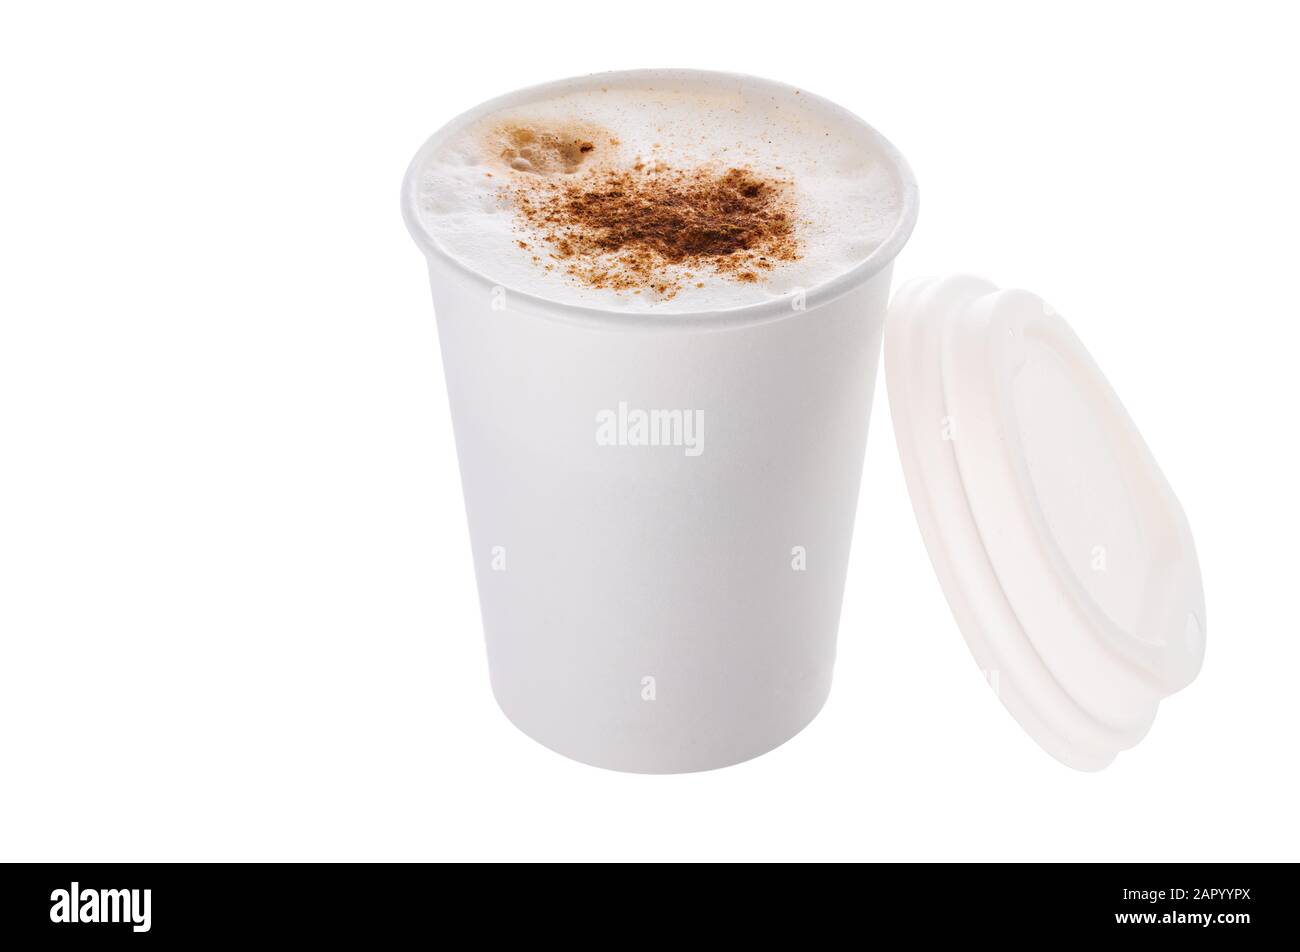 https://c8.alamy.com/comp/2APYYPX/coffee-with-milk-or-cappuccino-with-cinnamon-in-a-plastic-cup-take-away-isolated-on-white-background-2APYYPX.jpg